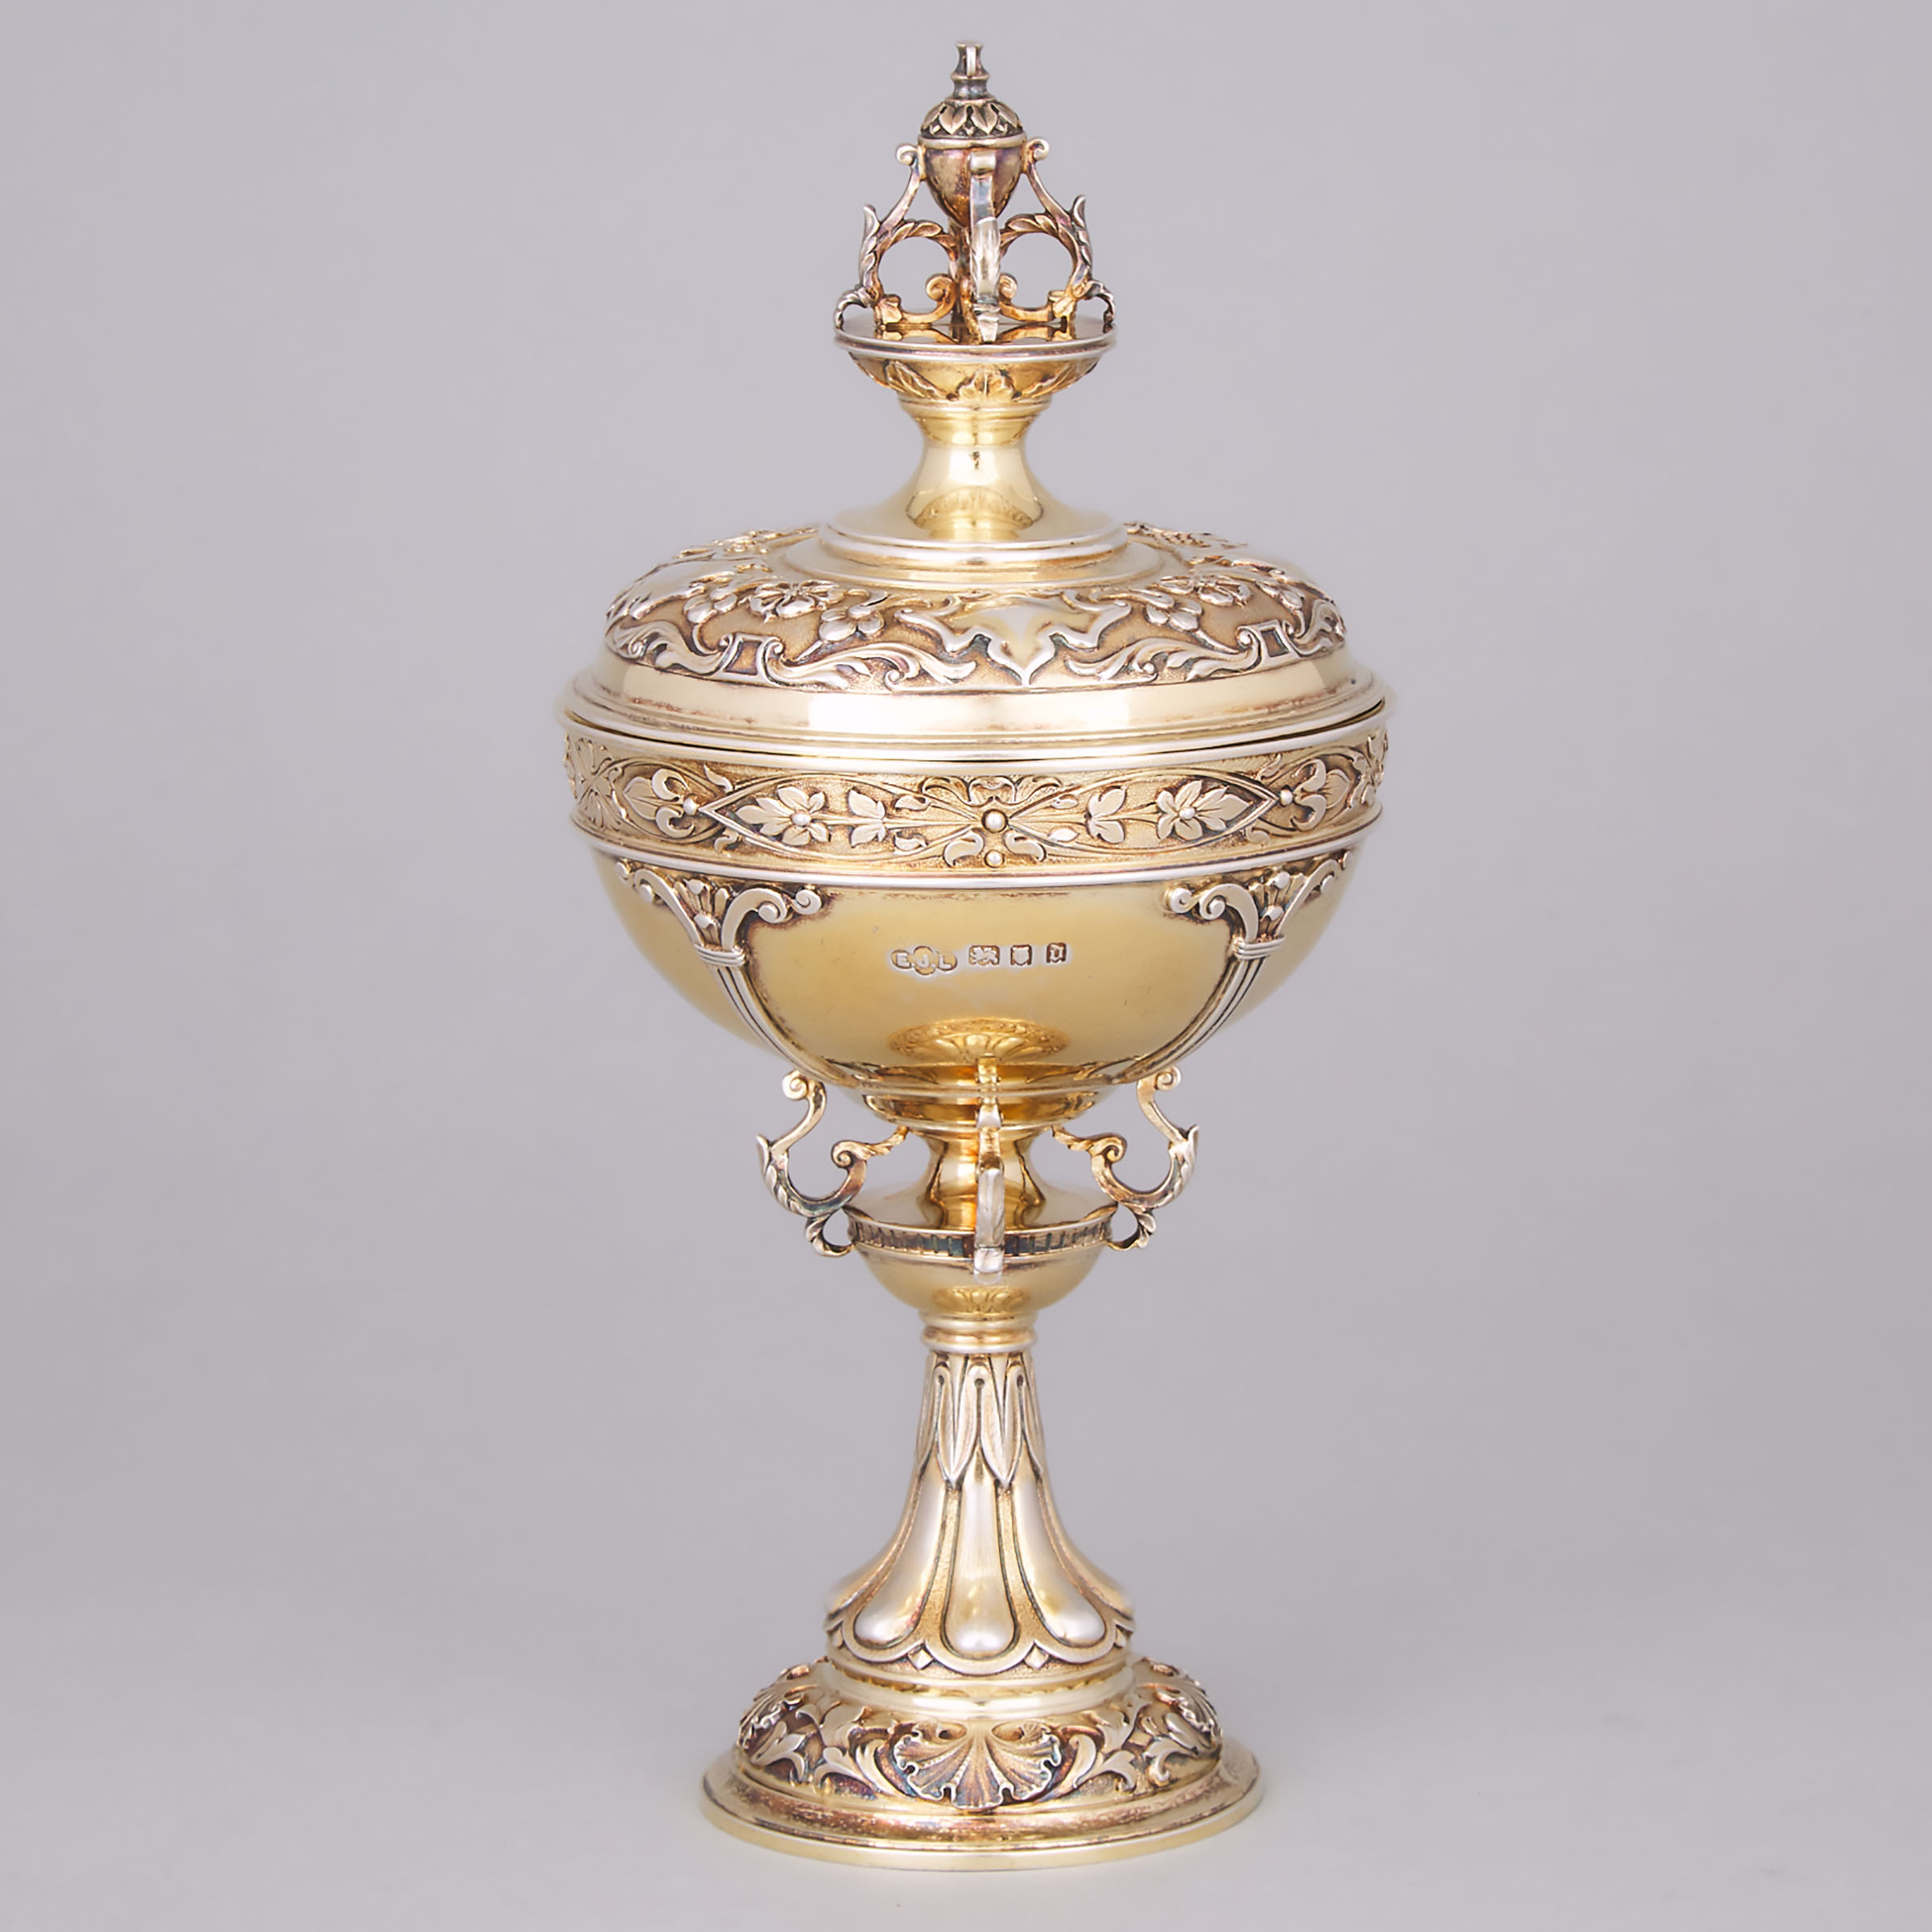 English Silver-Gilt Covered Cup, Ernest J. Lowe, London, 1919